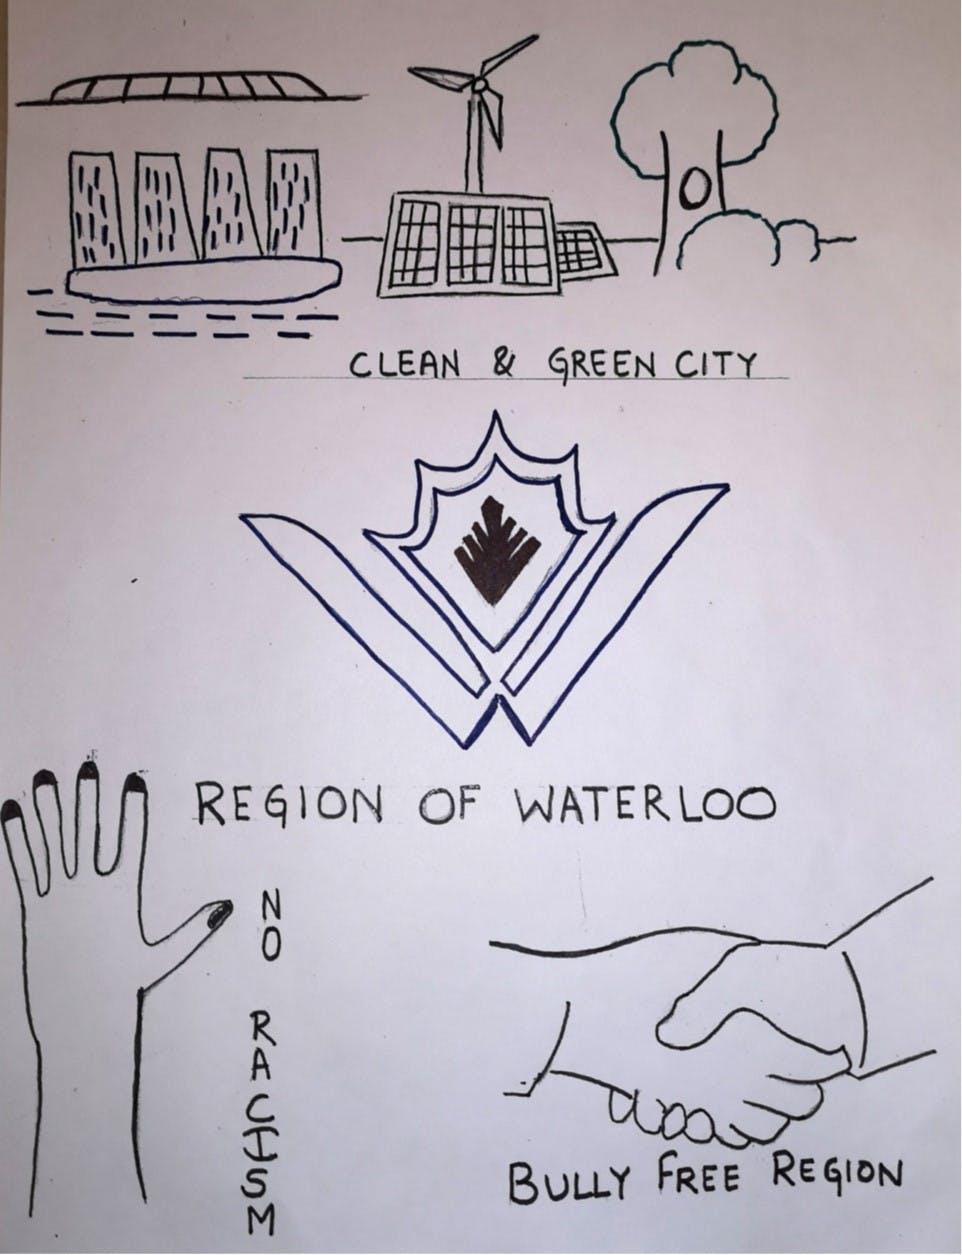 Blueprint by Madhav Verma depicts a vision of Waterloo Region that includes No Racism, Bully Free Region, Clean and Green City